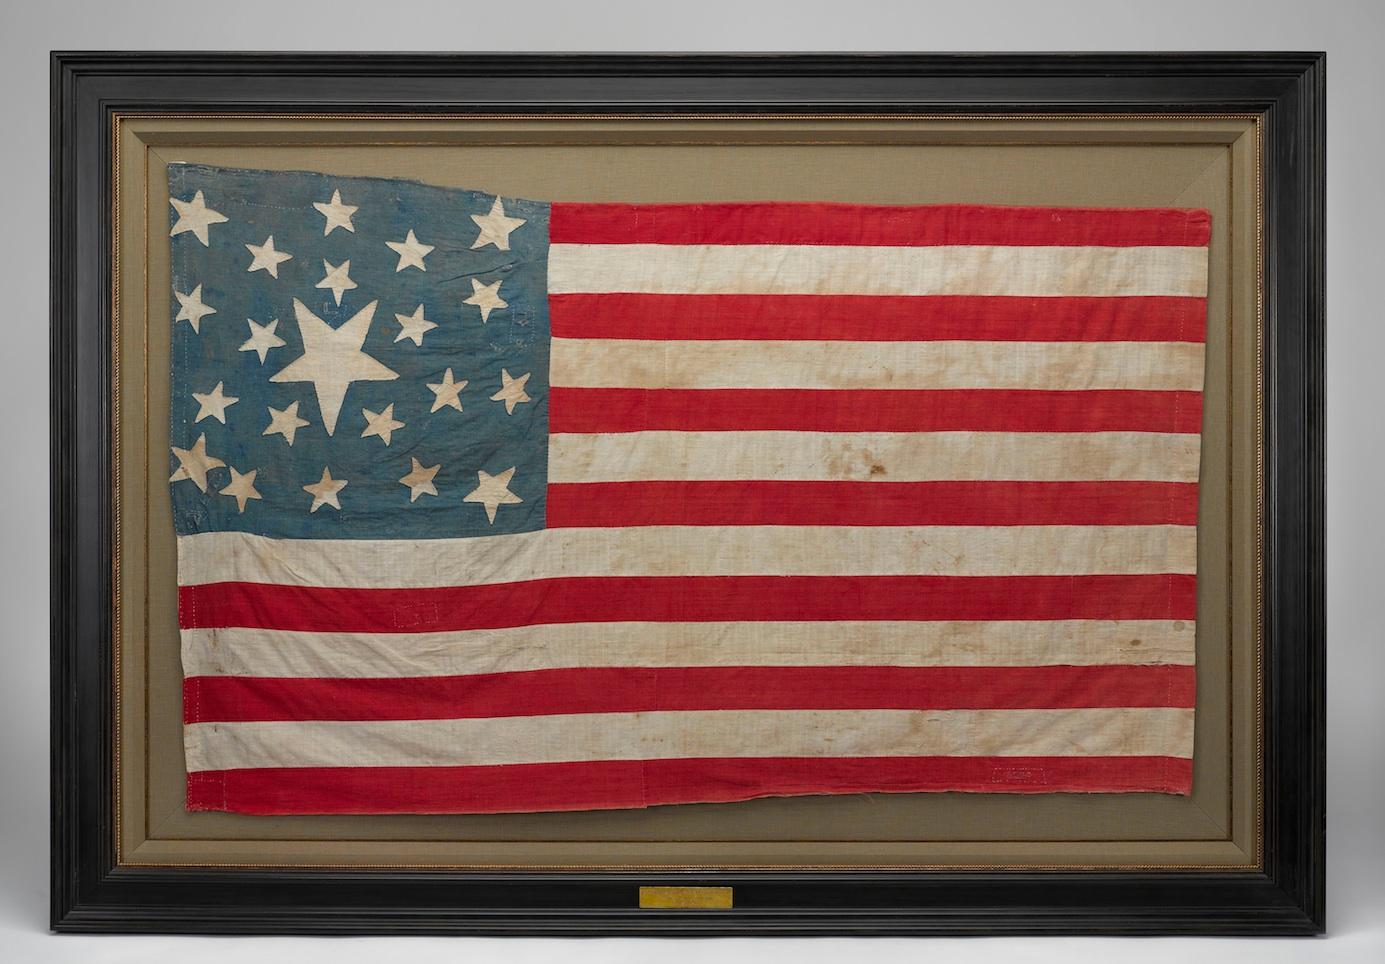 Presented is an impressive 21-star flag, circa 1860-1865. This is a southern-exclusionary 21-star flag constructed during the period of the American Civil War. The number of stars on this flag represent the number of states that remained loyal to